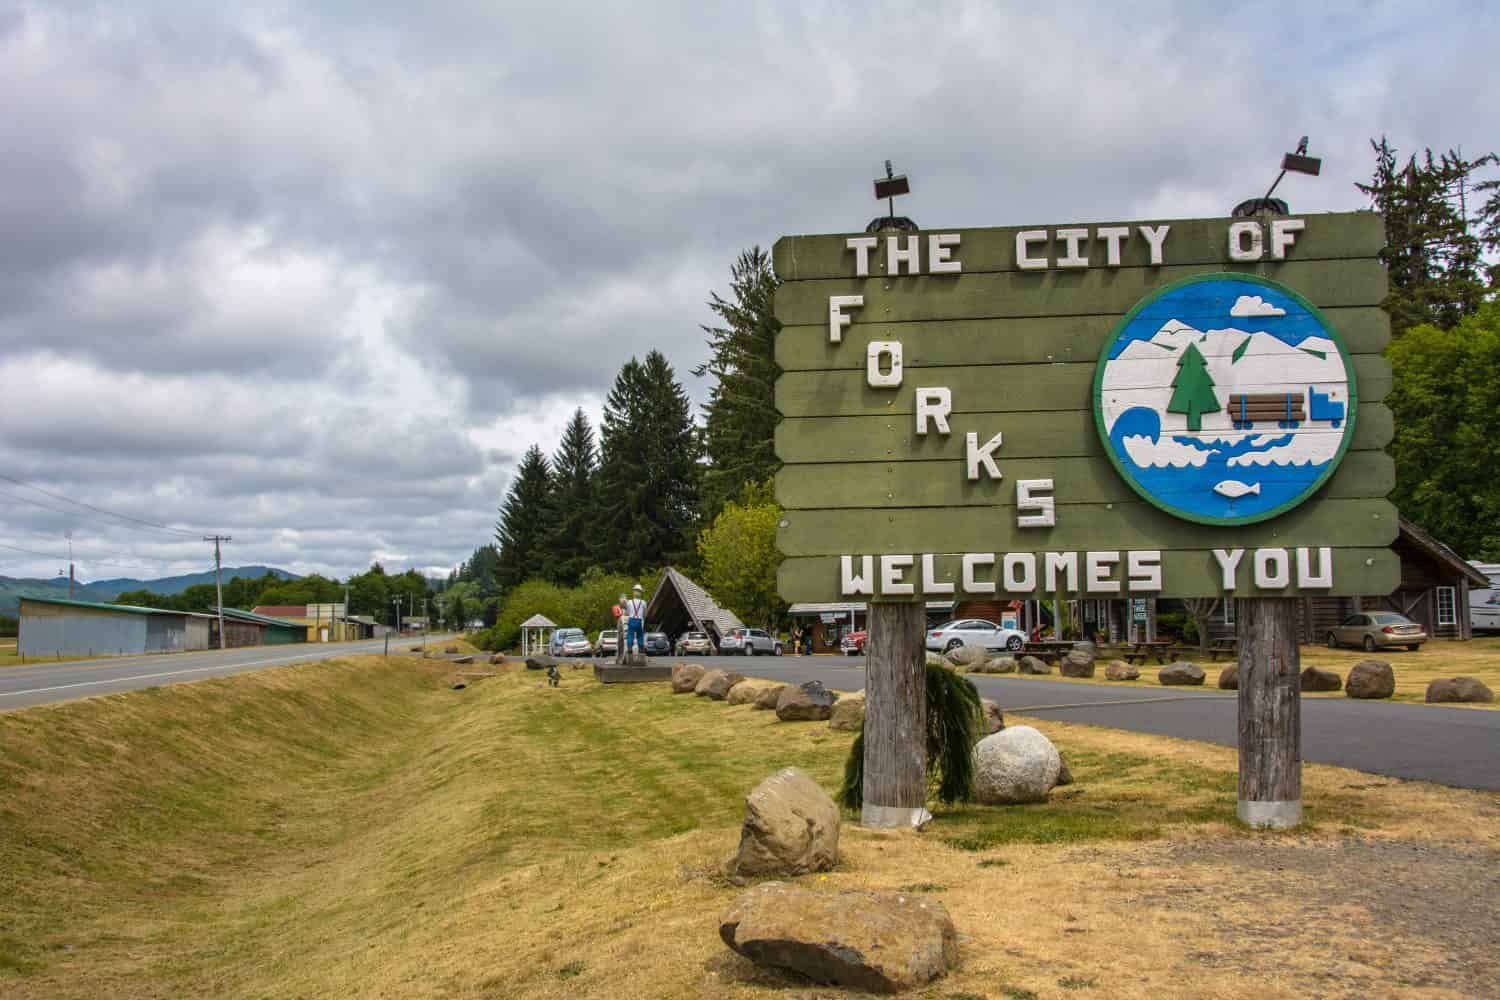 Typical welcome sign at the entrance to an American city. Road sign - Welcome to Forks, Washington